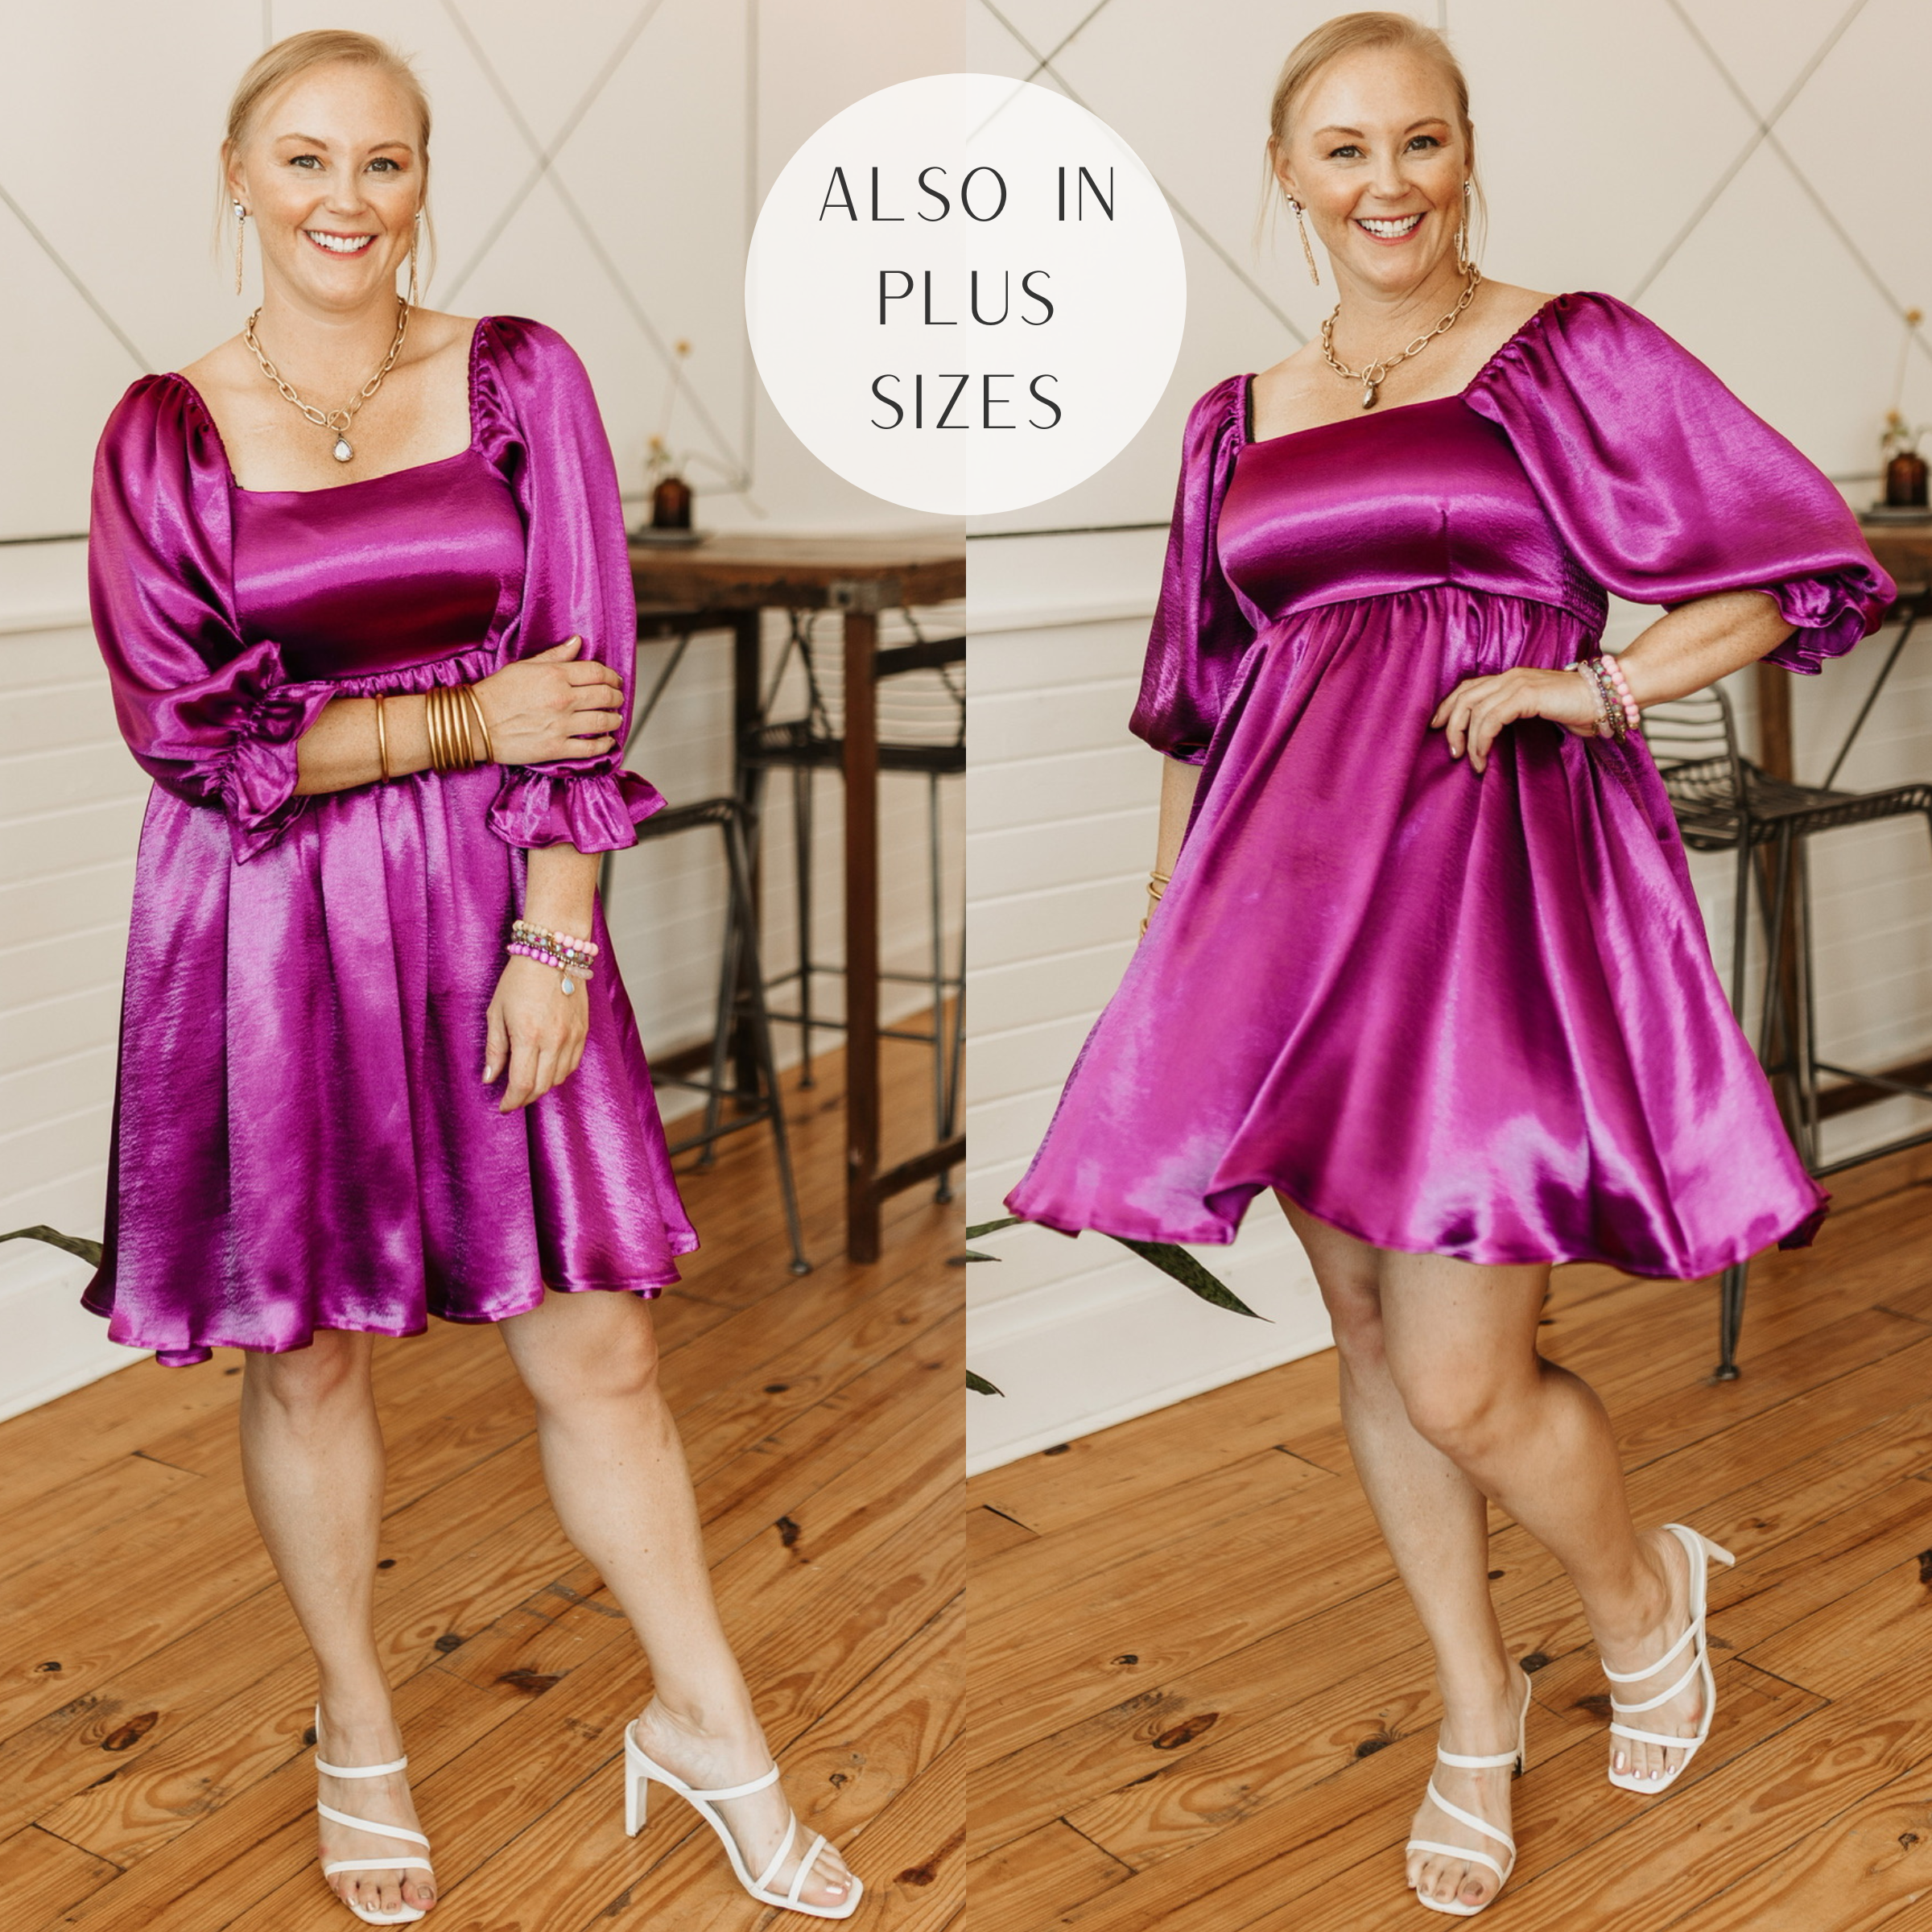 Model is wearing a magenta purple satin dress that has flowy half sleeves and a flowy skirt that is knee length. This dress has a square neckline. Model has it paired with white sandals and gold jewelry.